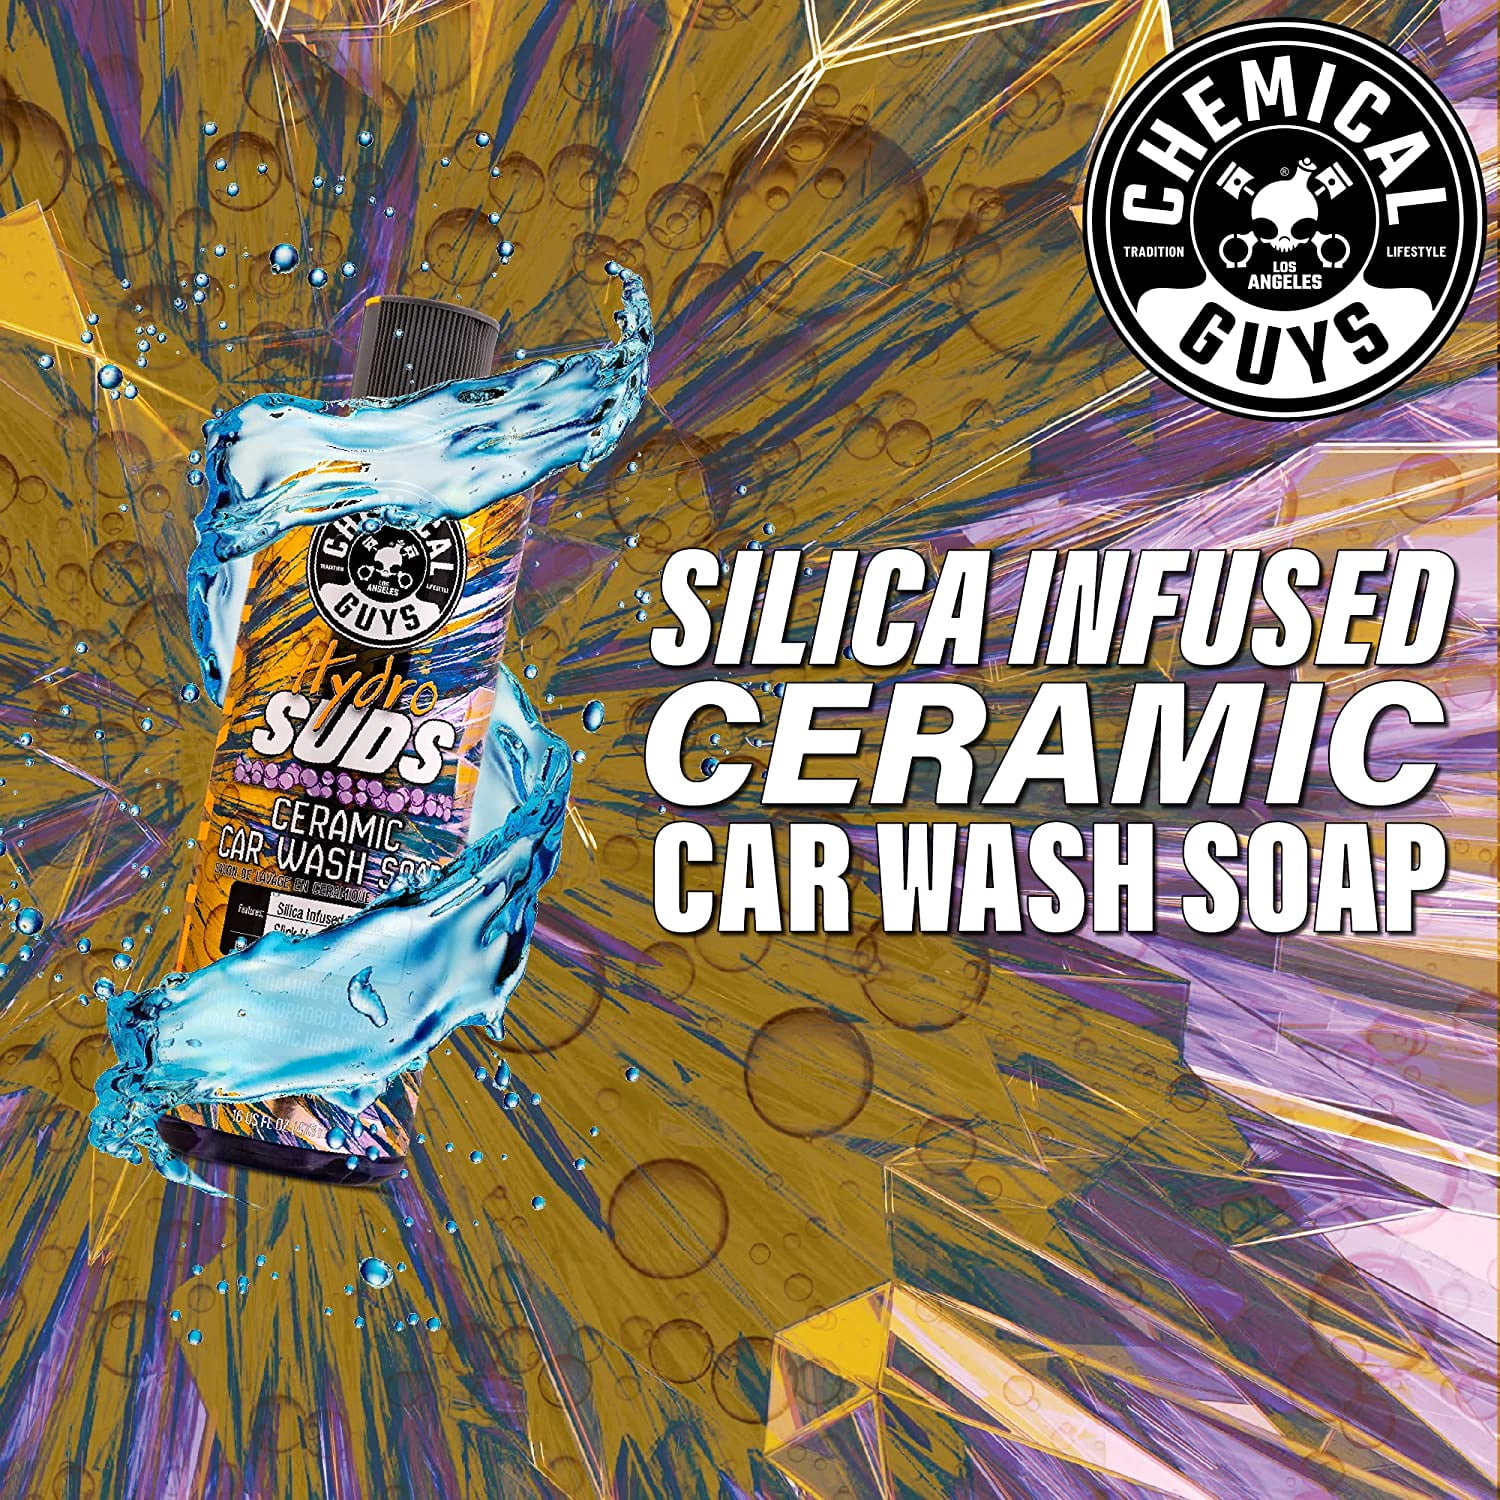 Trying @Chemical Guys hydro suds ceramic car wash soap for the